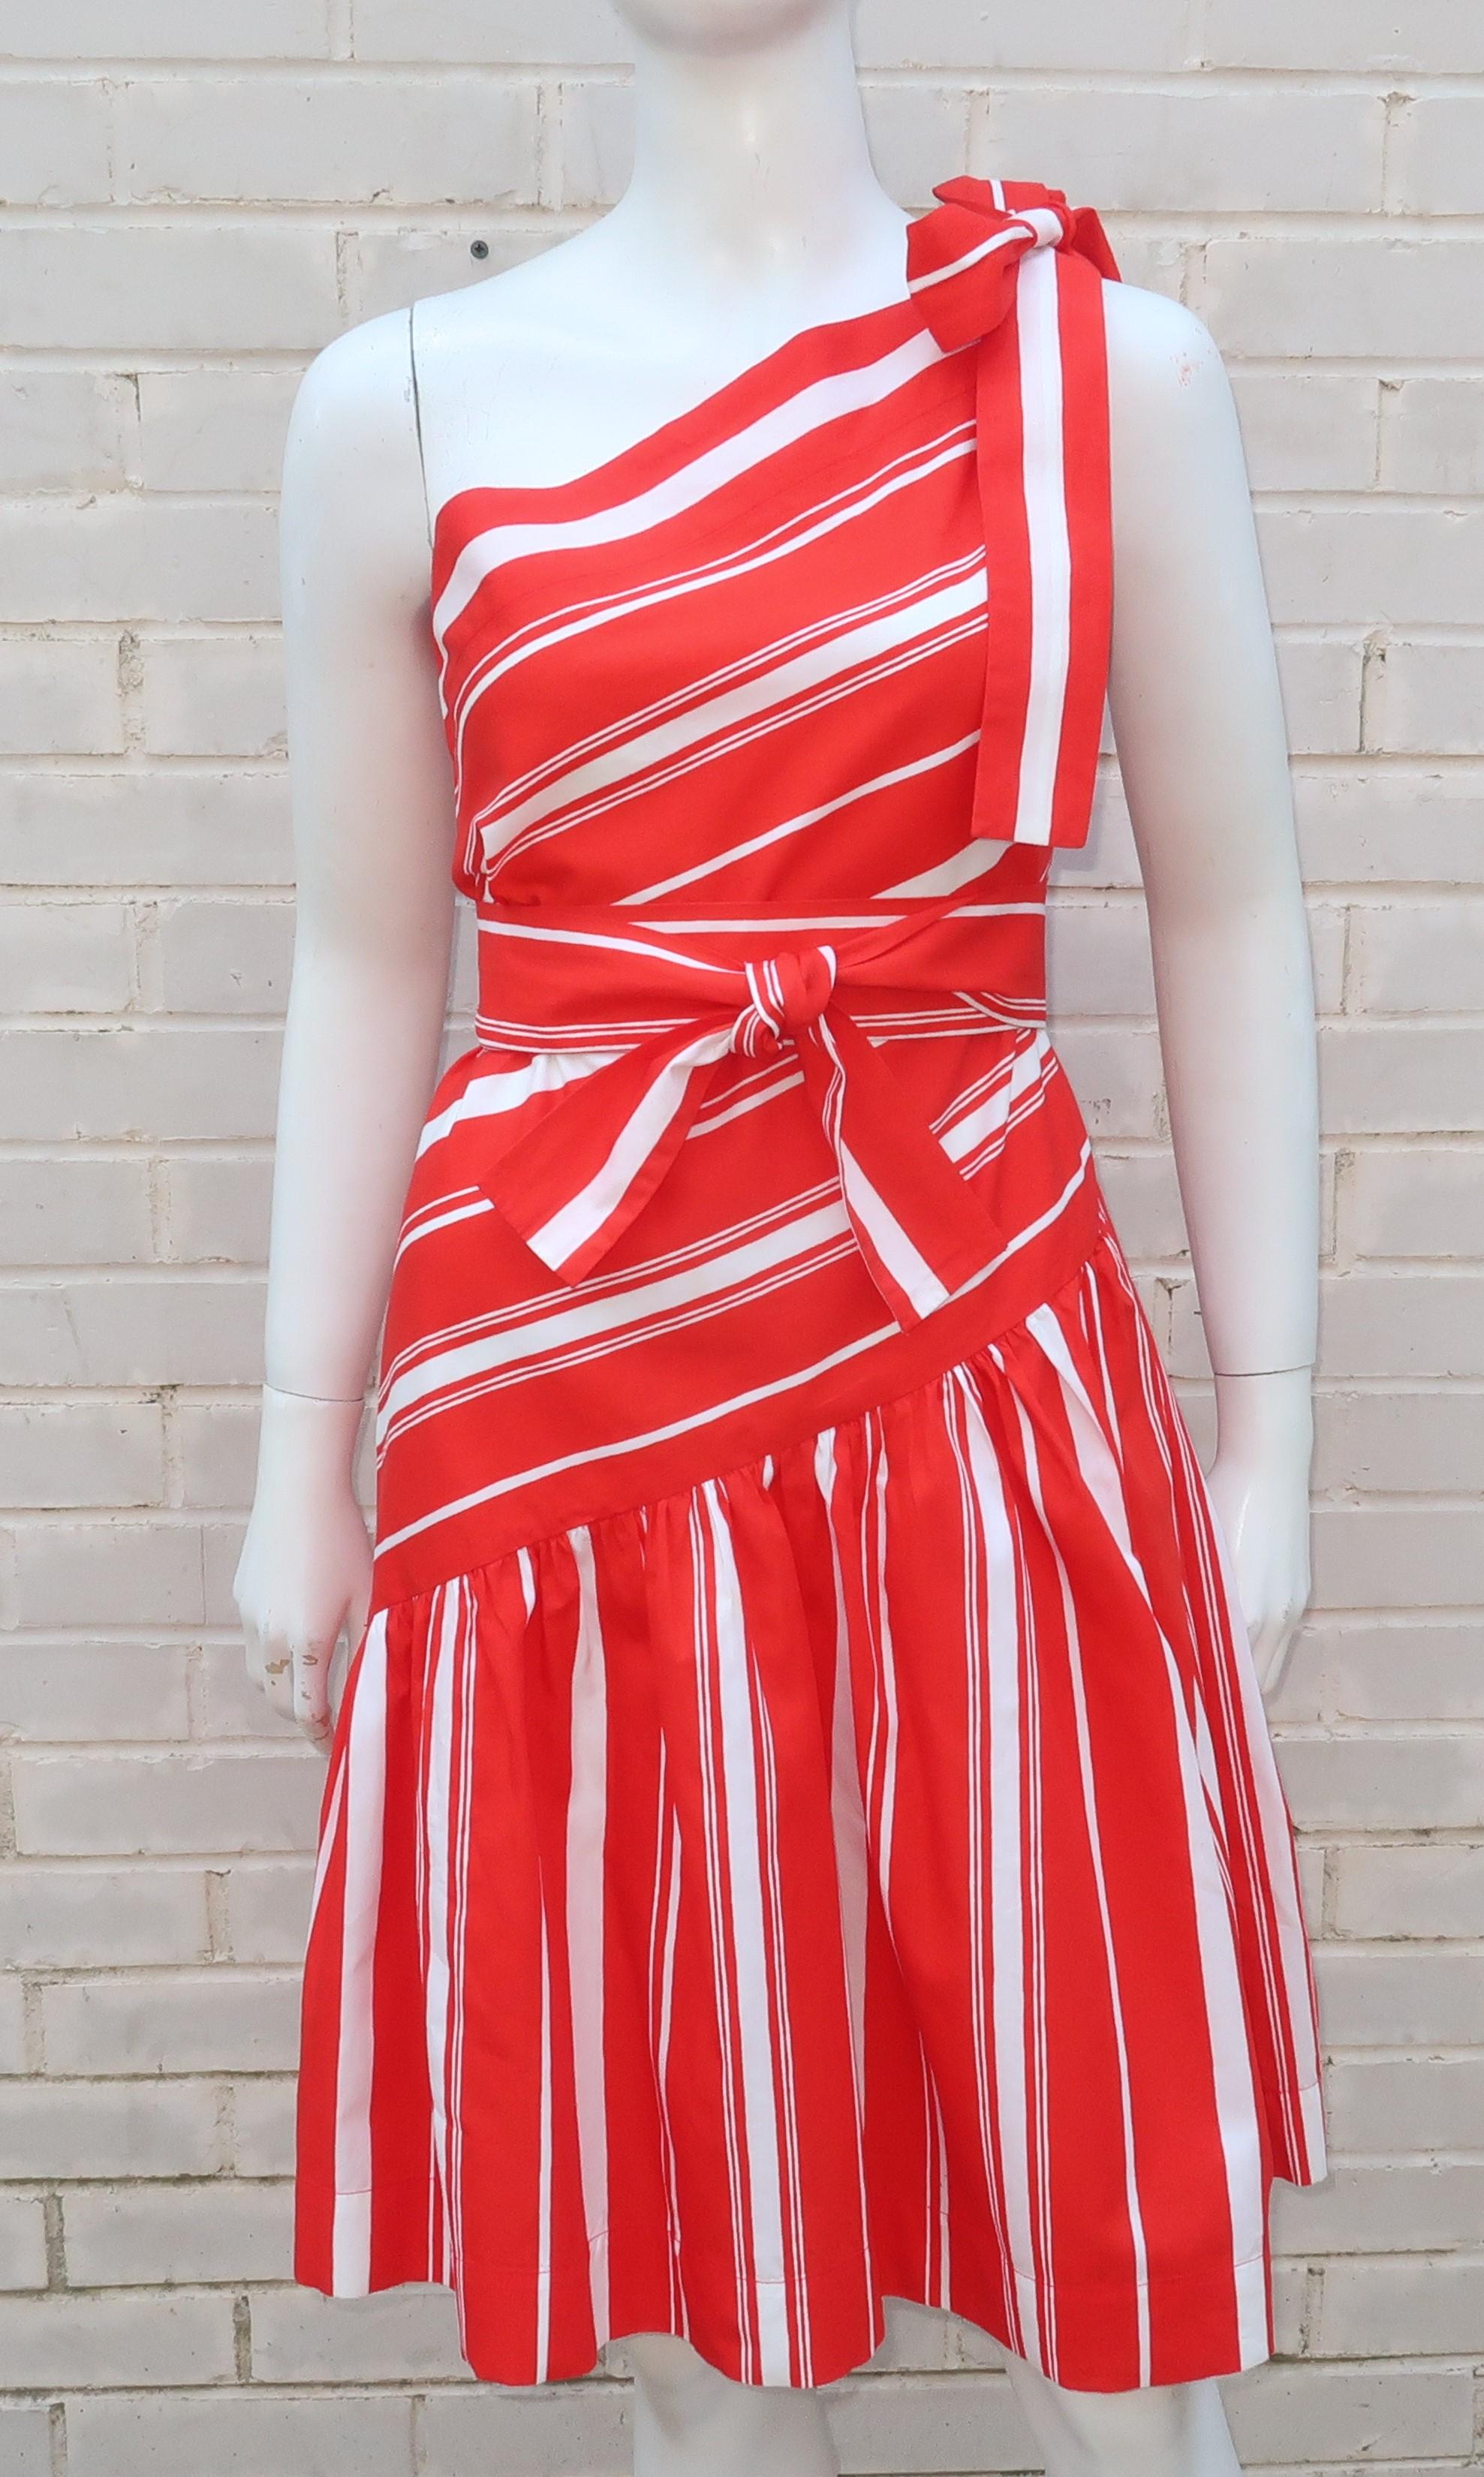 This adorable Yves Saint Laurent red and white candy stripe sundress is a yummy confection.  The crisp cotton fabric features an asymmetrical one shoulder drop waist bodice with a gathered skirt all accented by a tie at the shoulder and another for